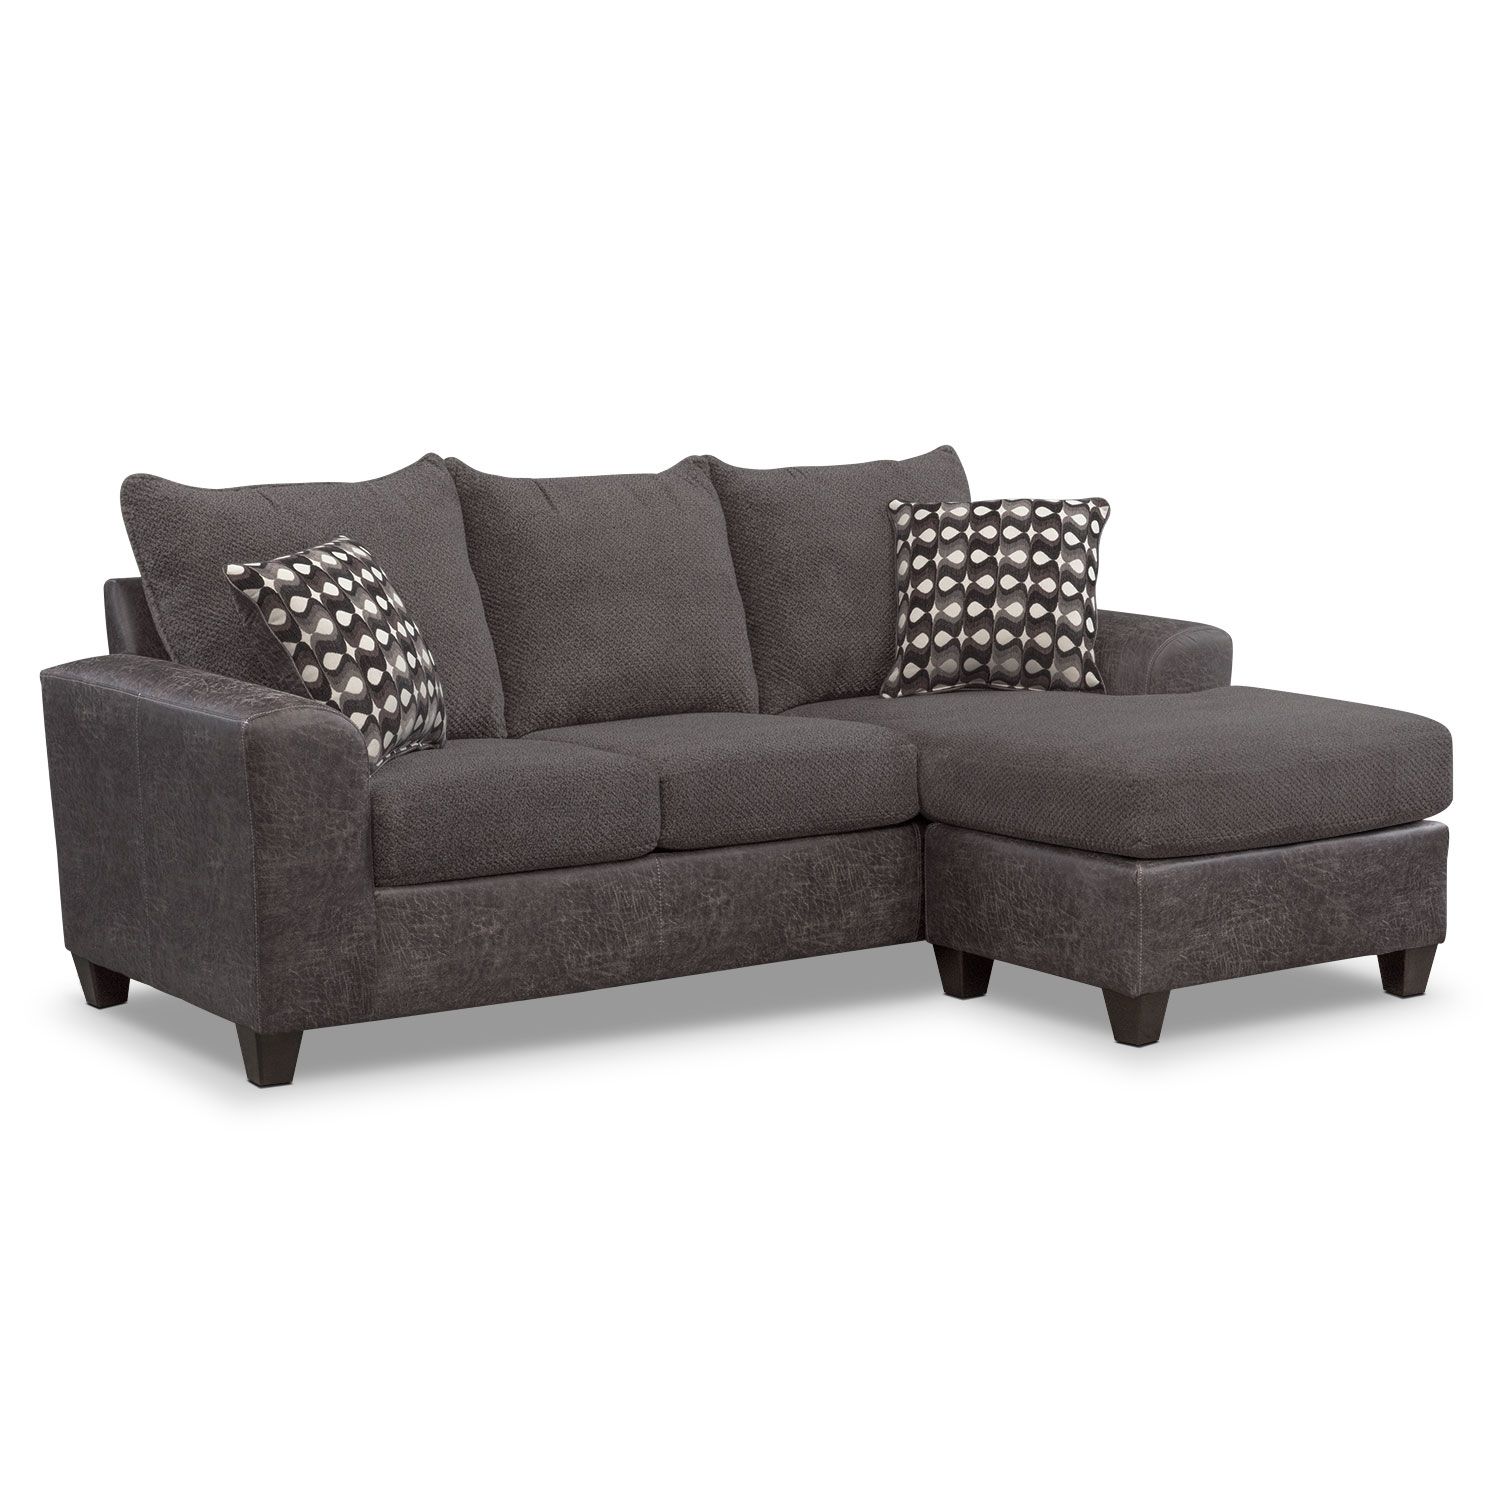 Sofas And Couches | Living Room Seating | Value City Furniture And With Aquarius Dark Grey 2 Piece Sectionals With Laf Chaise (View 14 of 30)